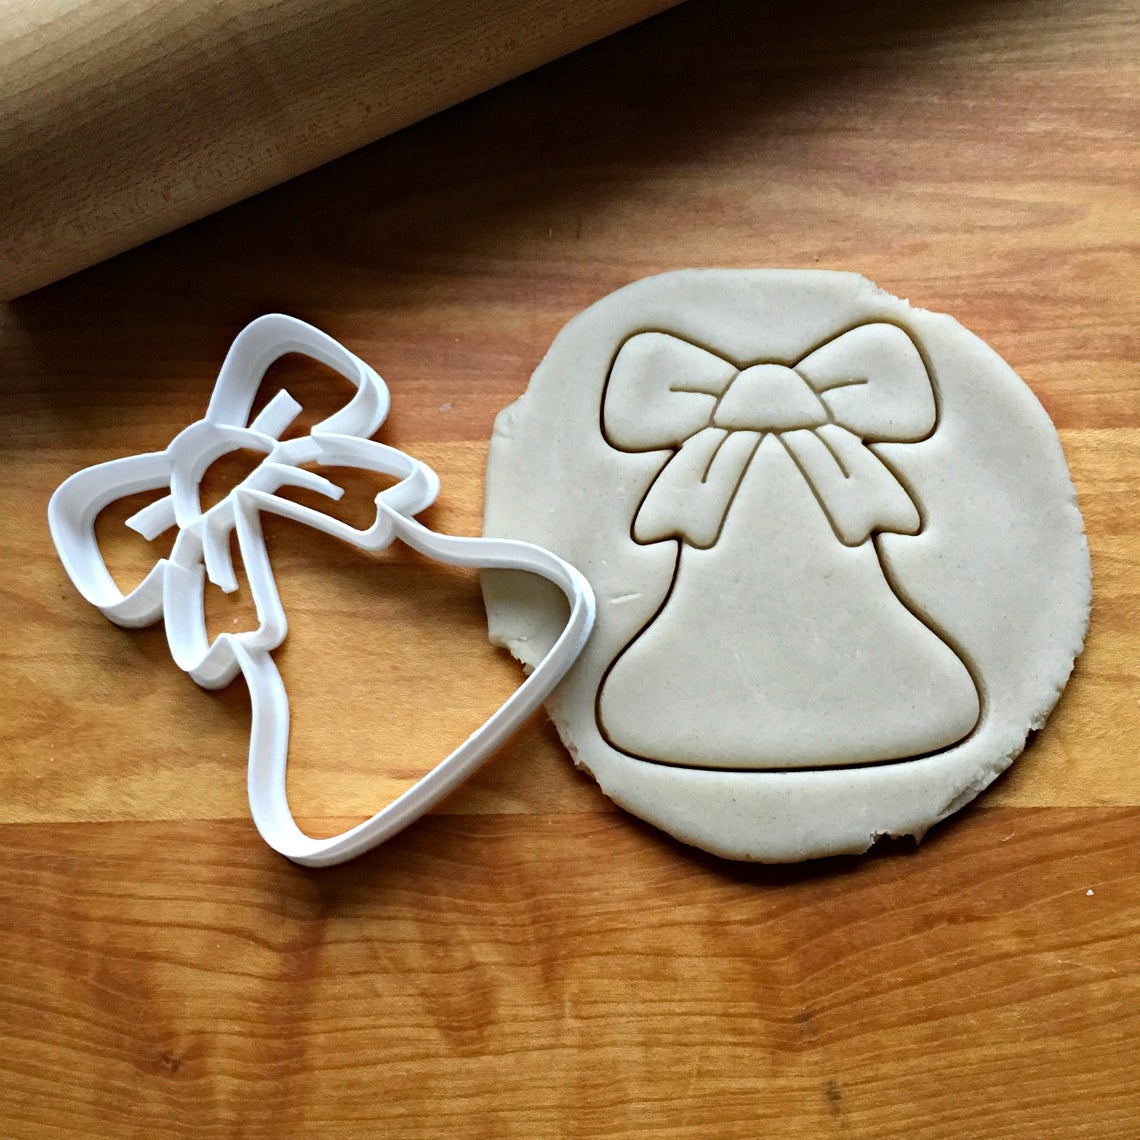  Bell Pepper Cookie Cutter : Handmade Products